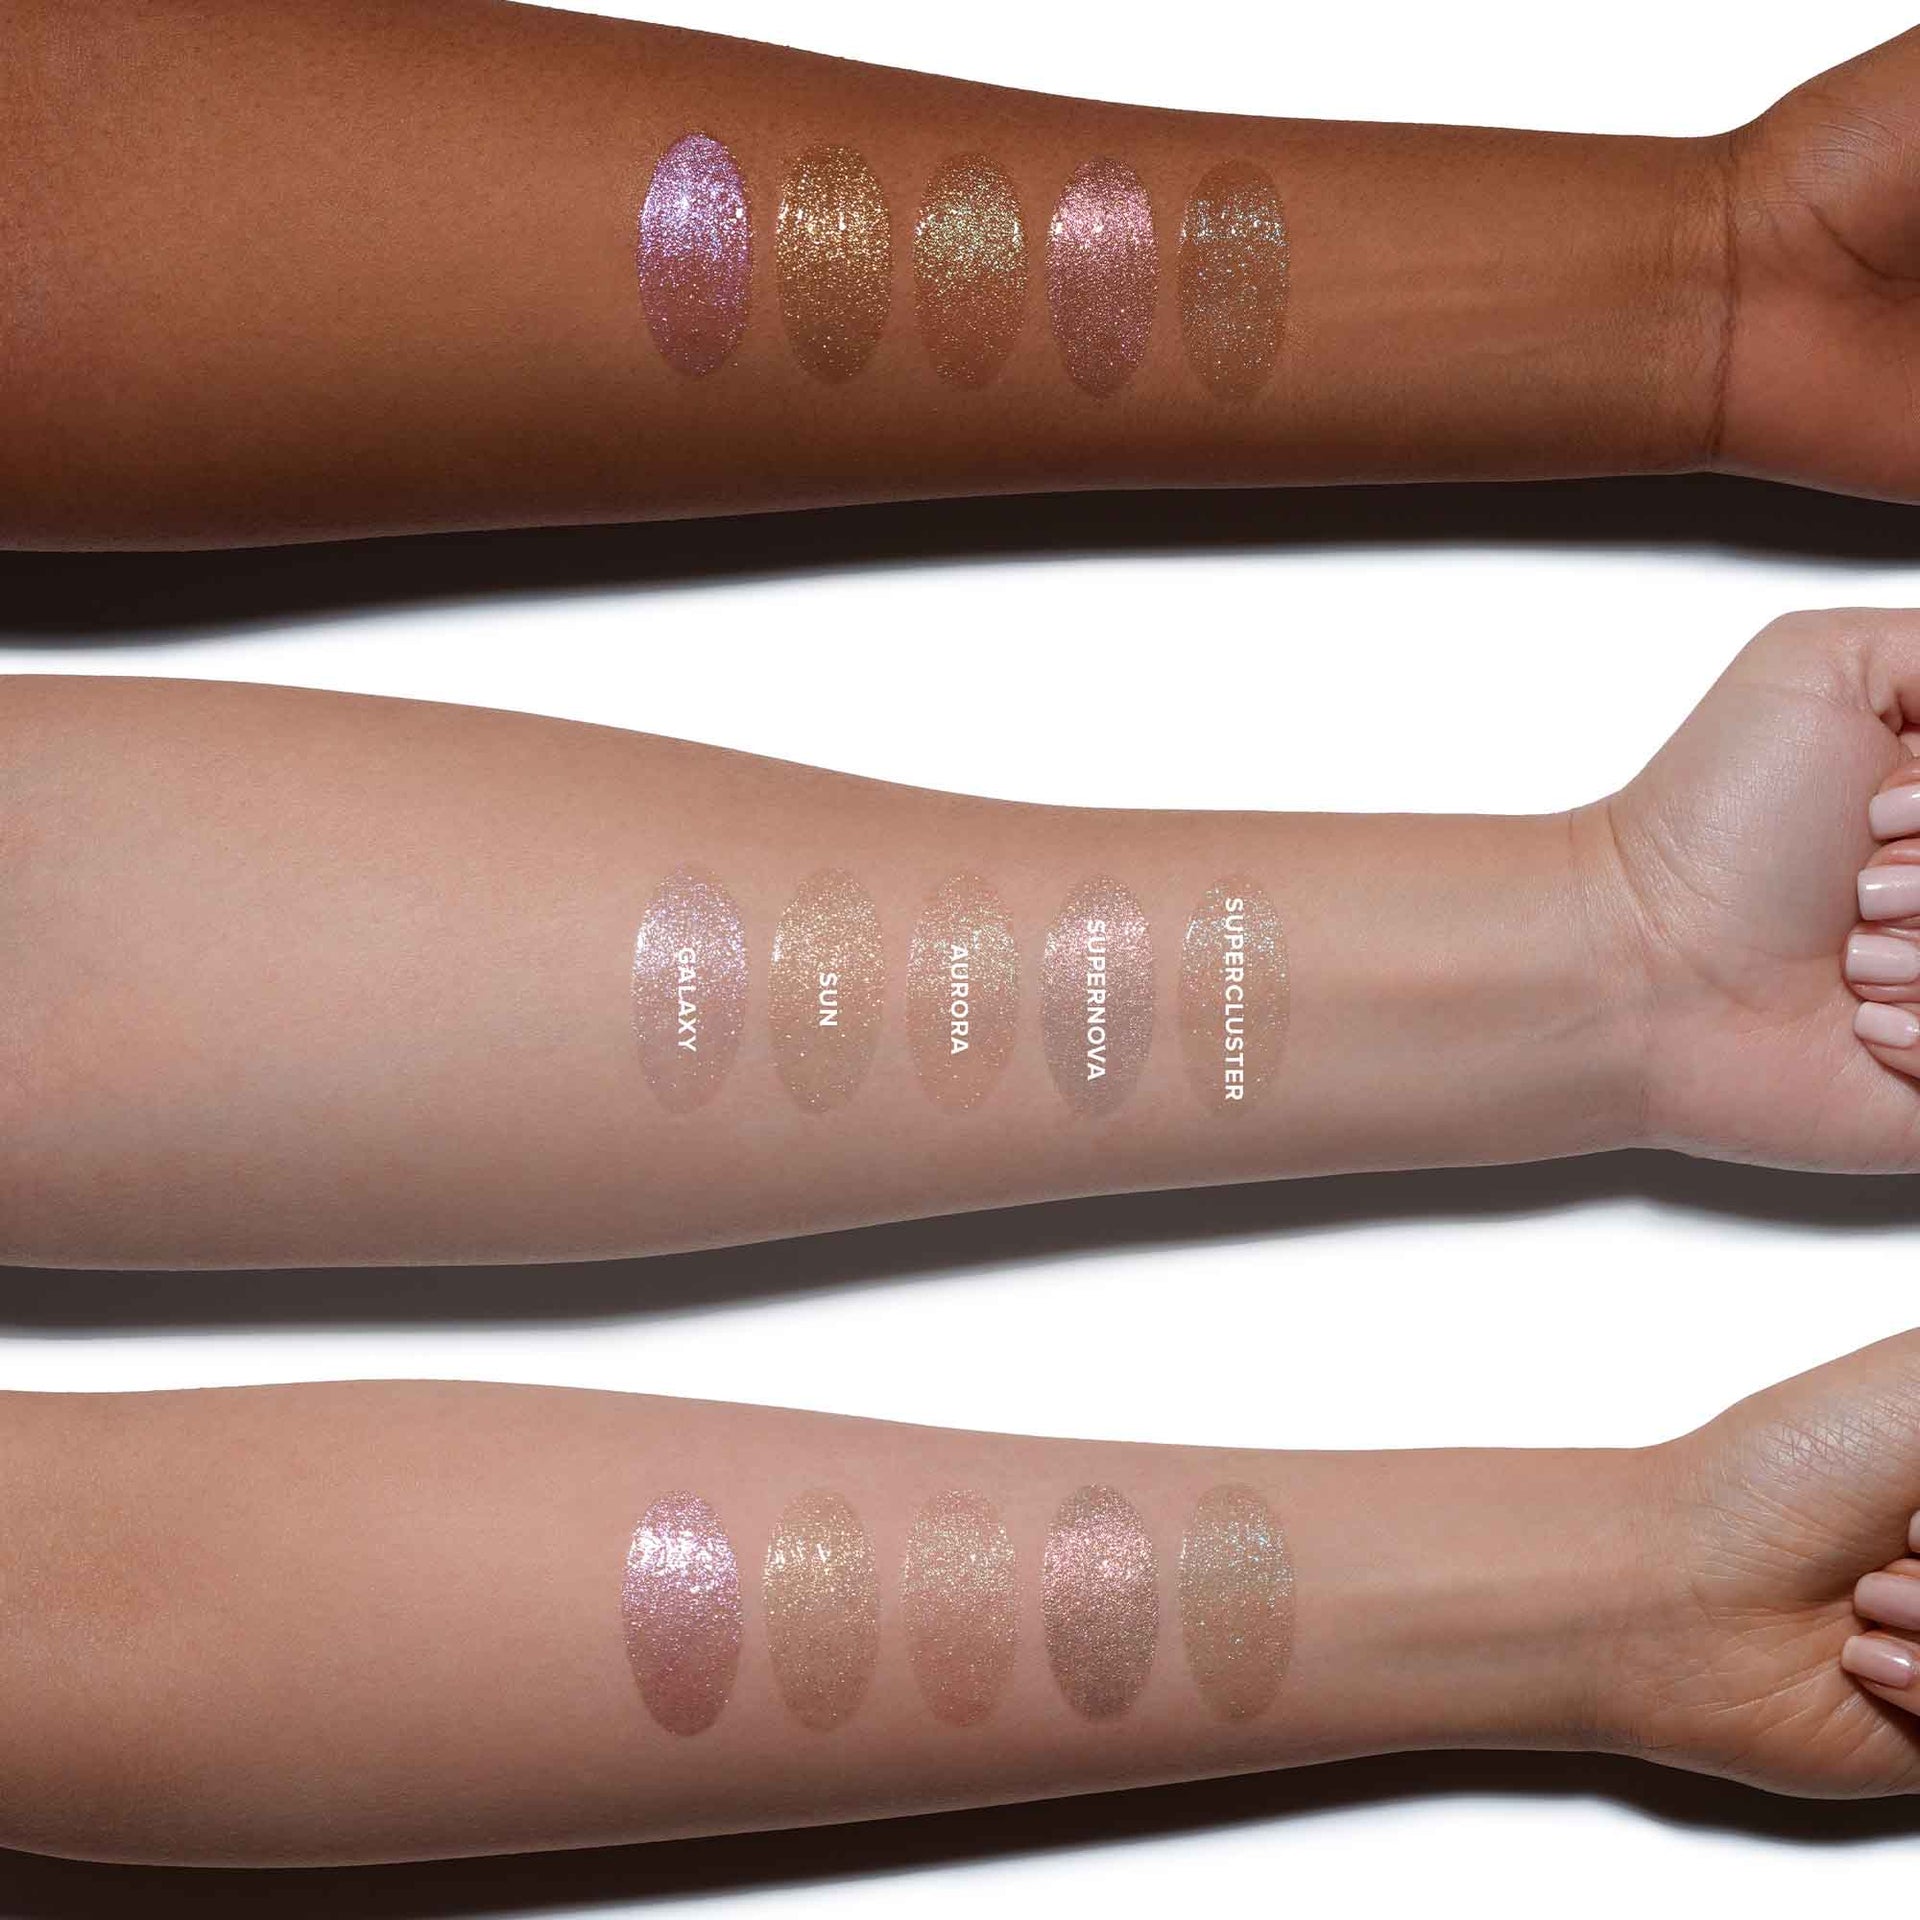 Cosmic Collection Eye Gloss arm swatch